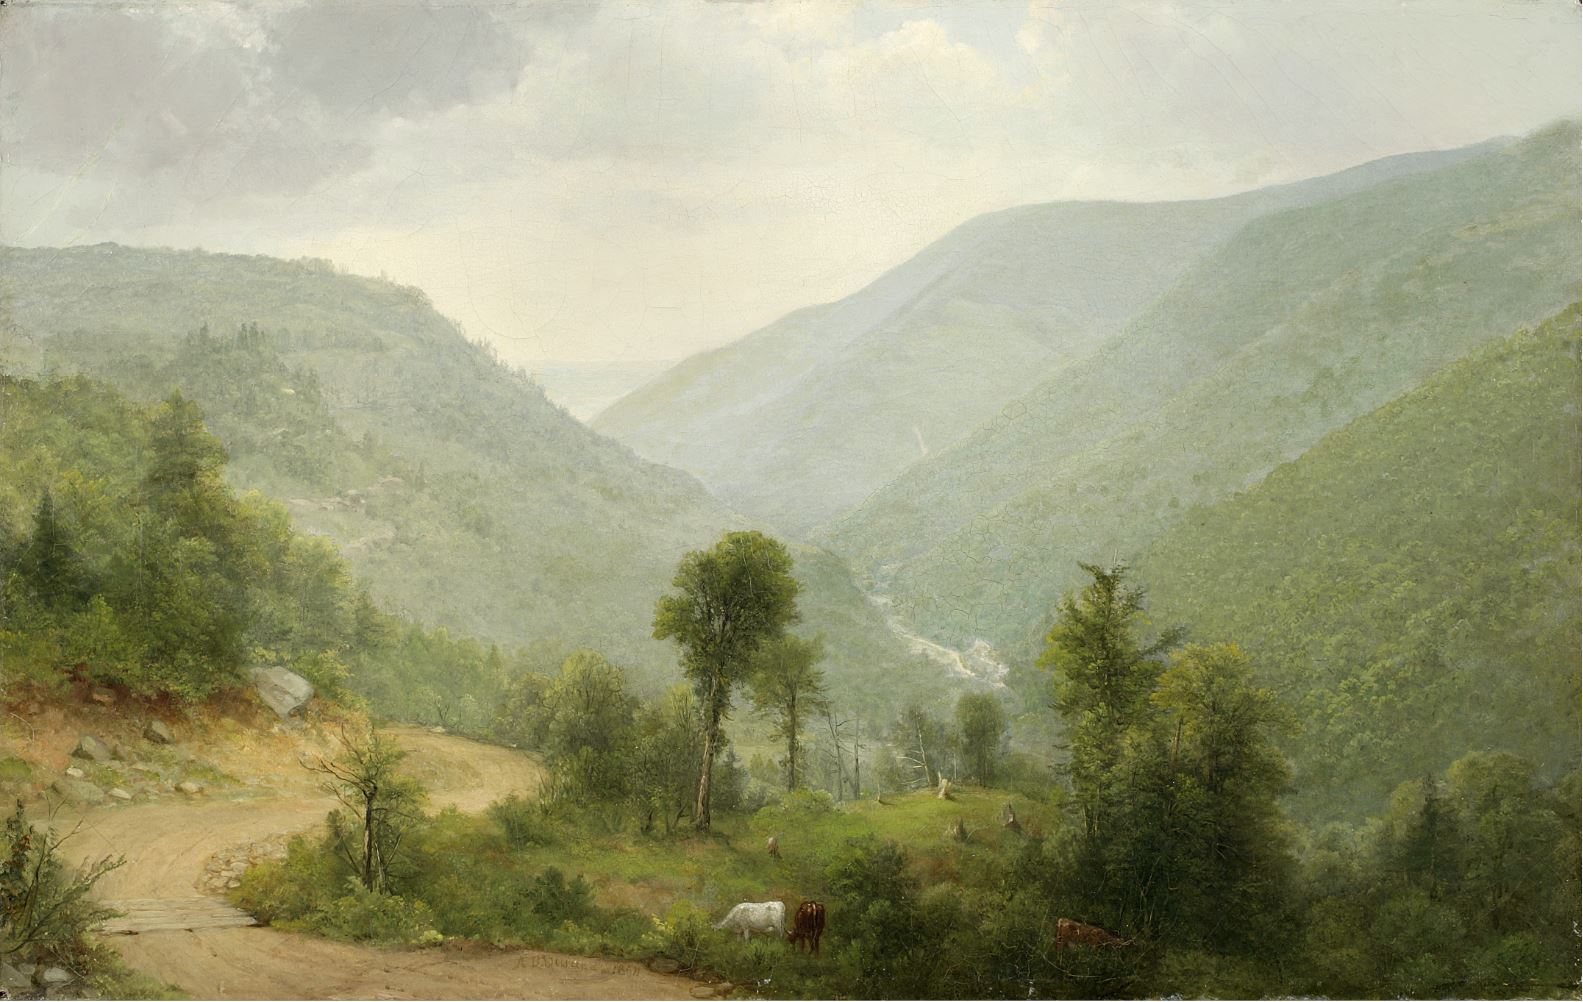 Poetry Of Nature: Hudson River School Landscapes from the New-York Historical Society